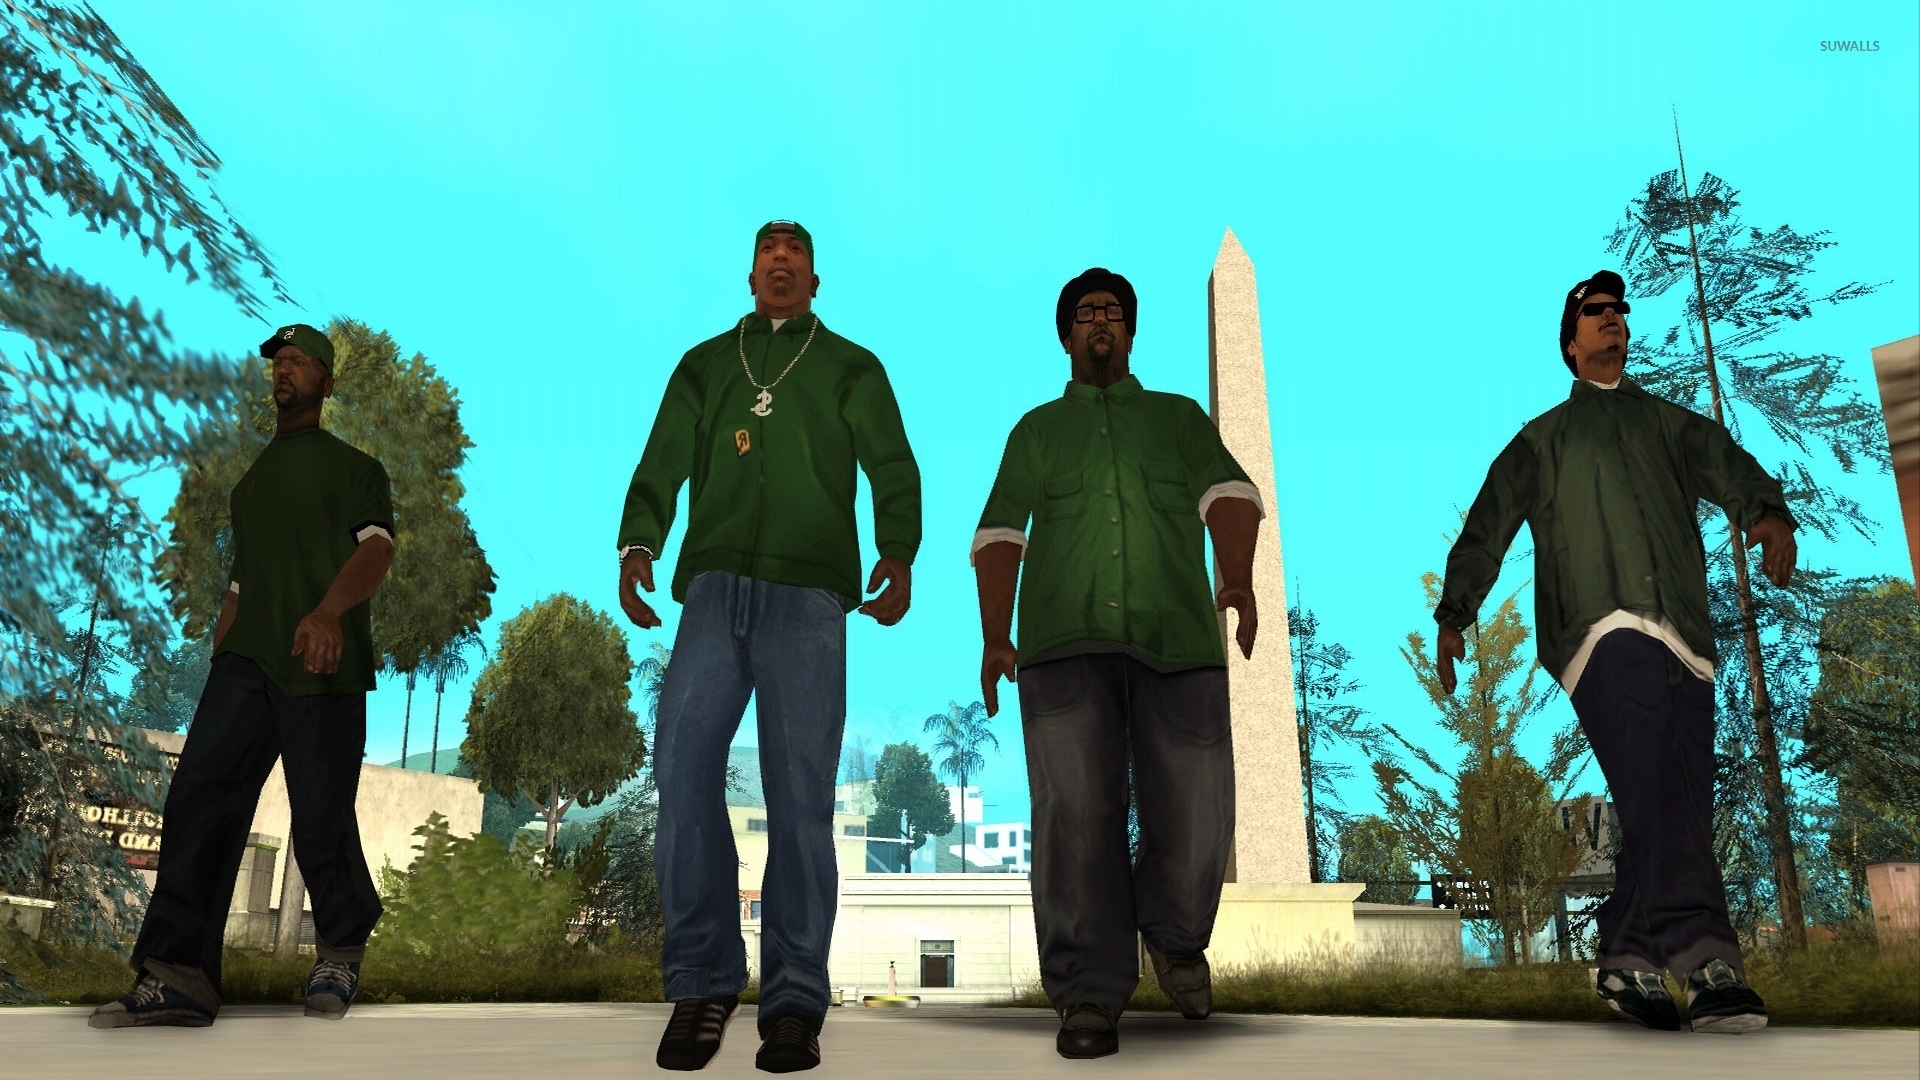 Grand Theft Auto: San Andreas – GameSir Official Store